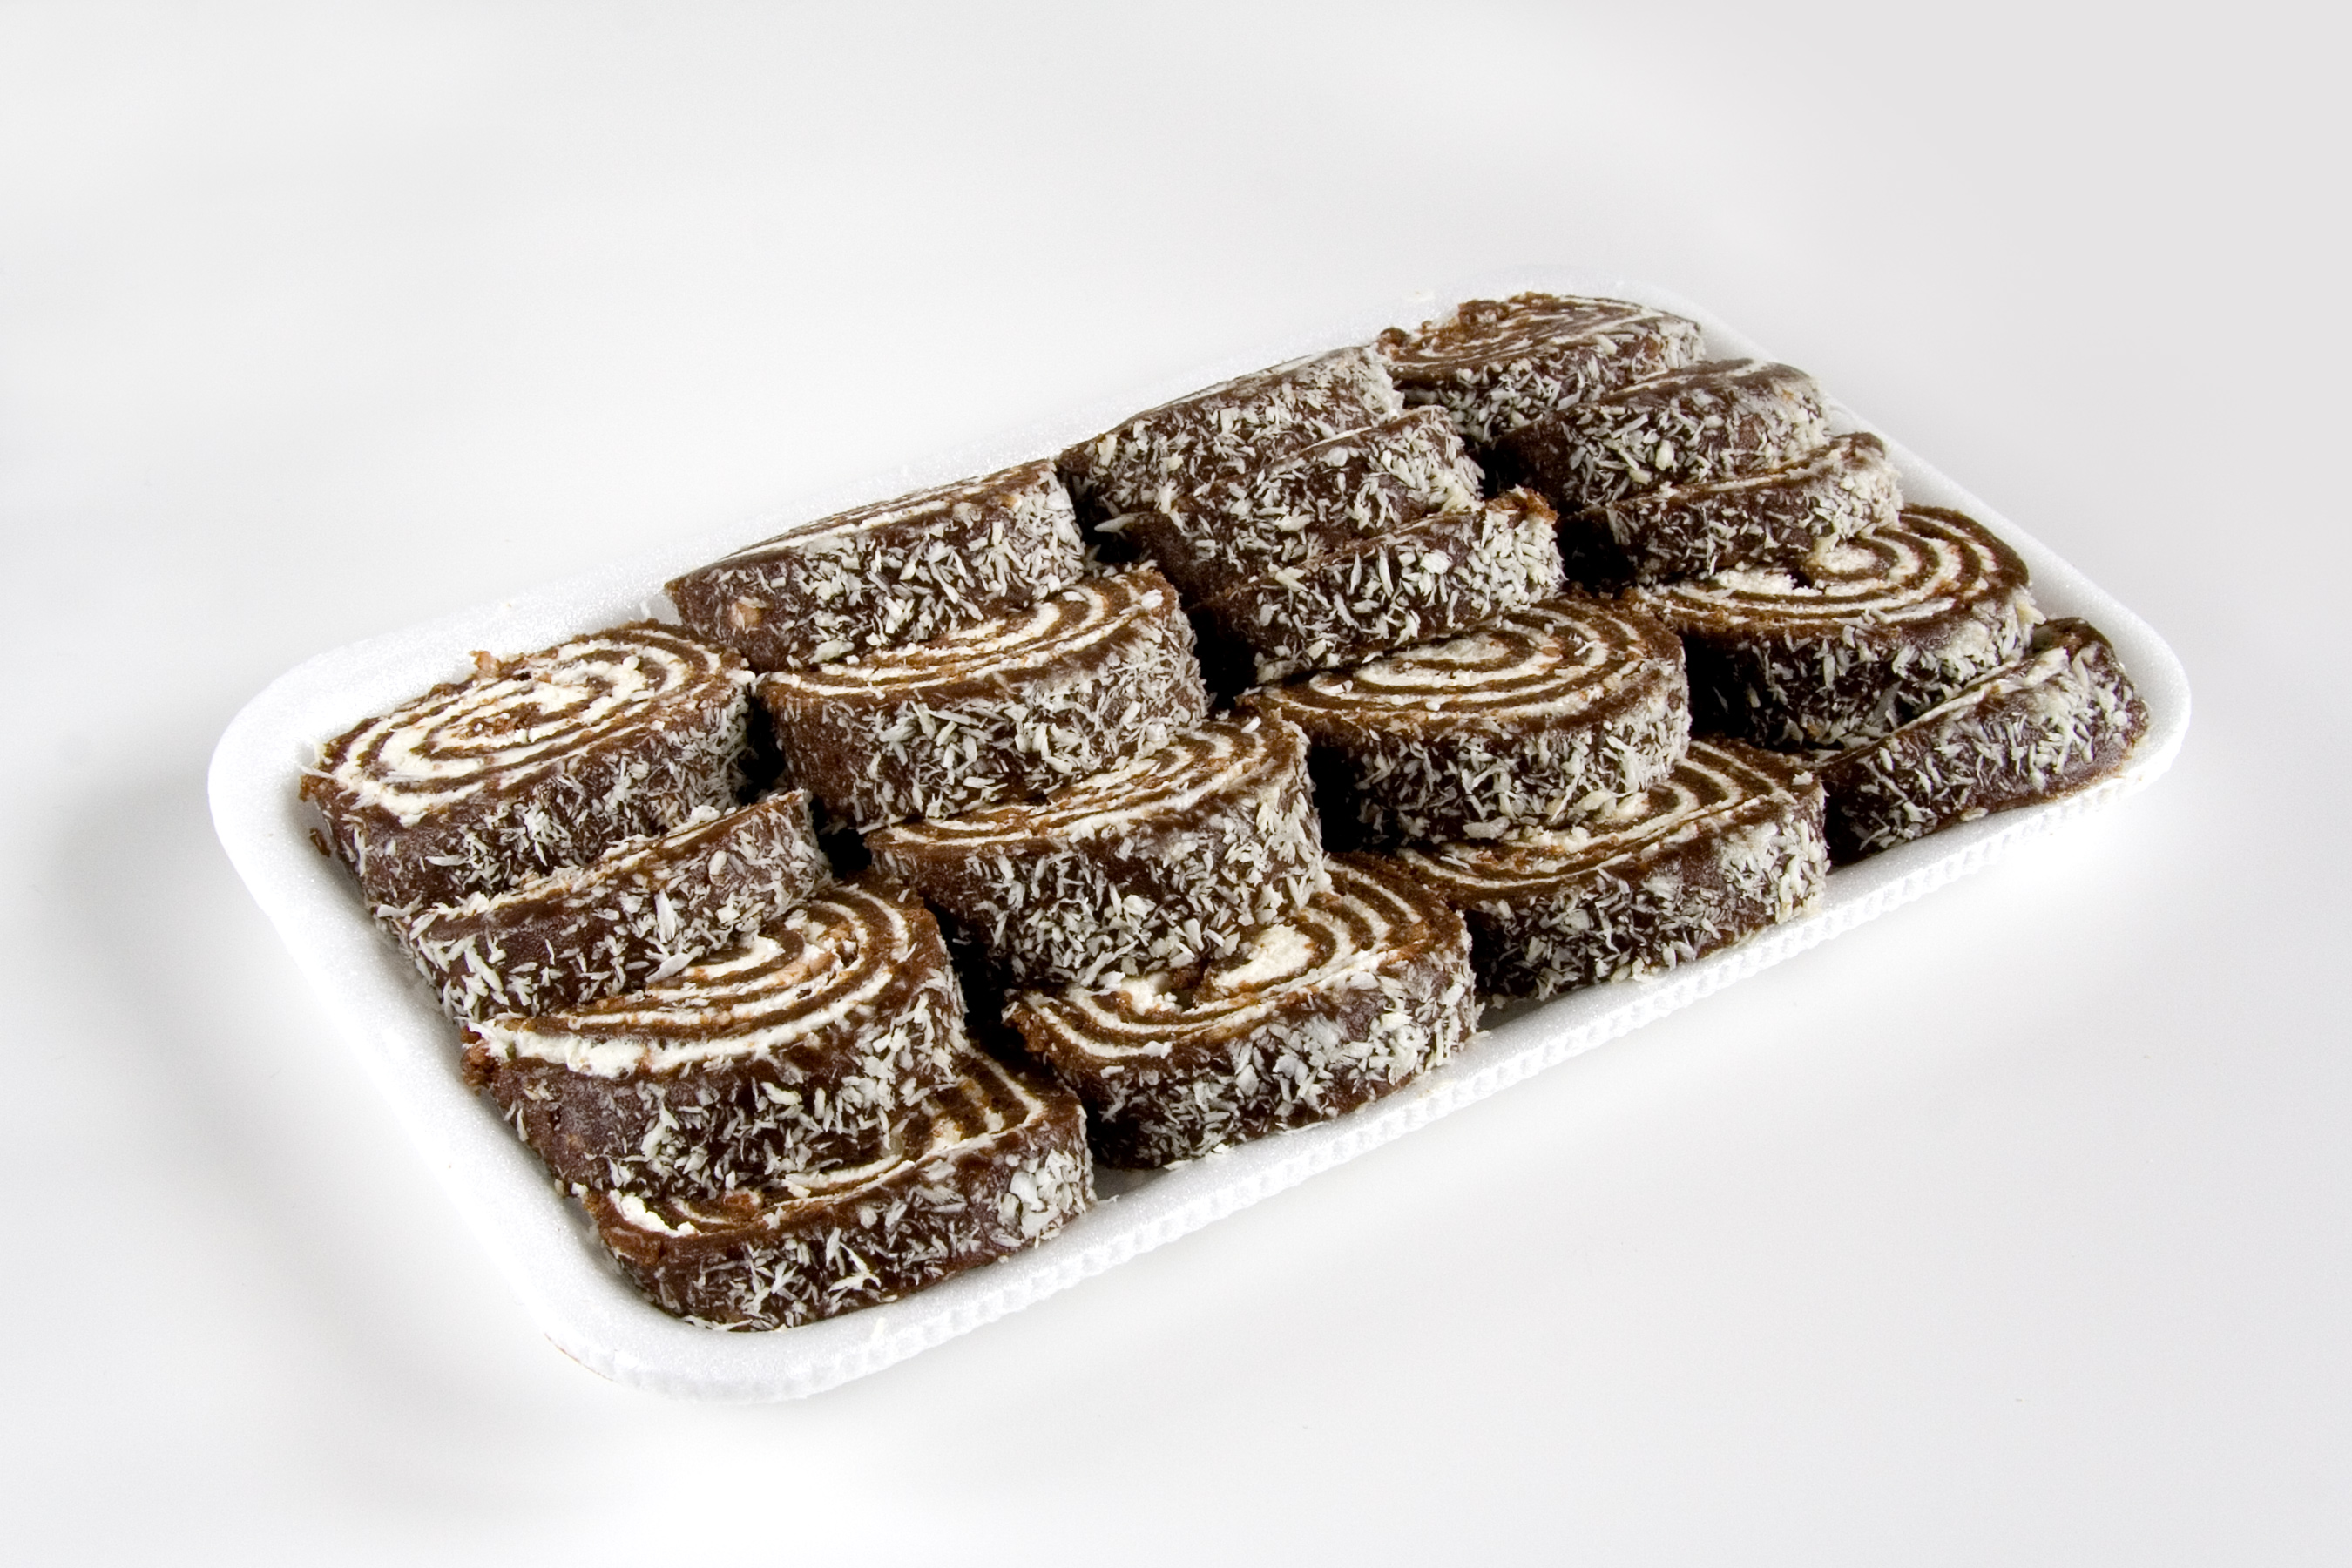 Chocolate rolls with coconut flakes